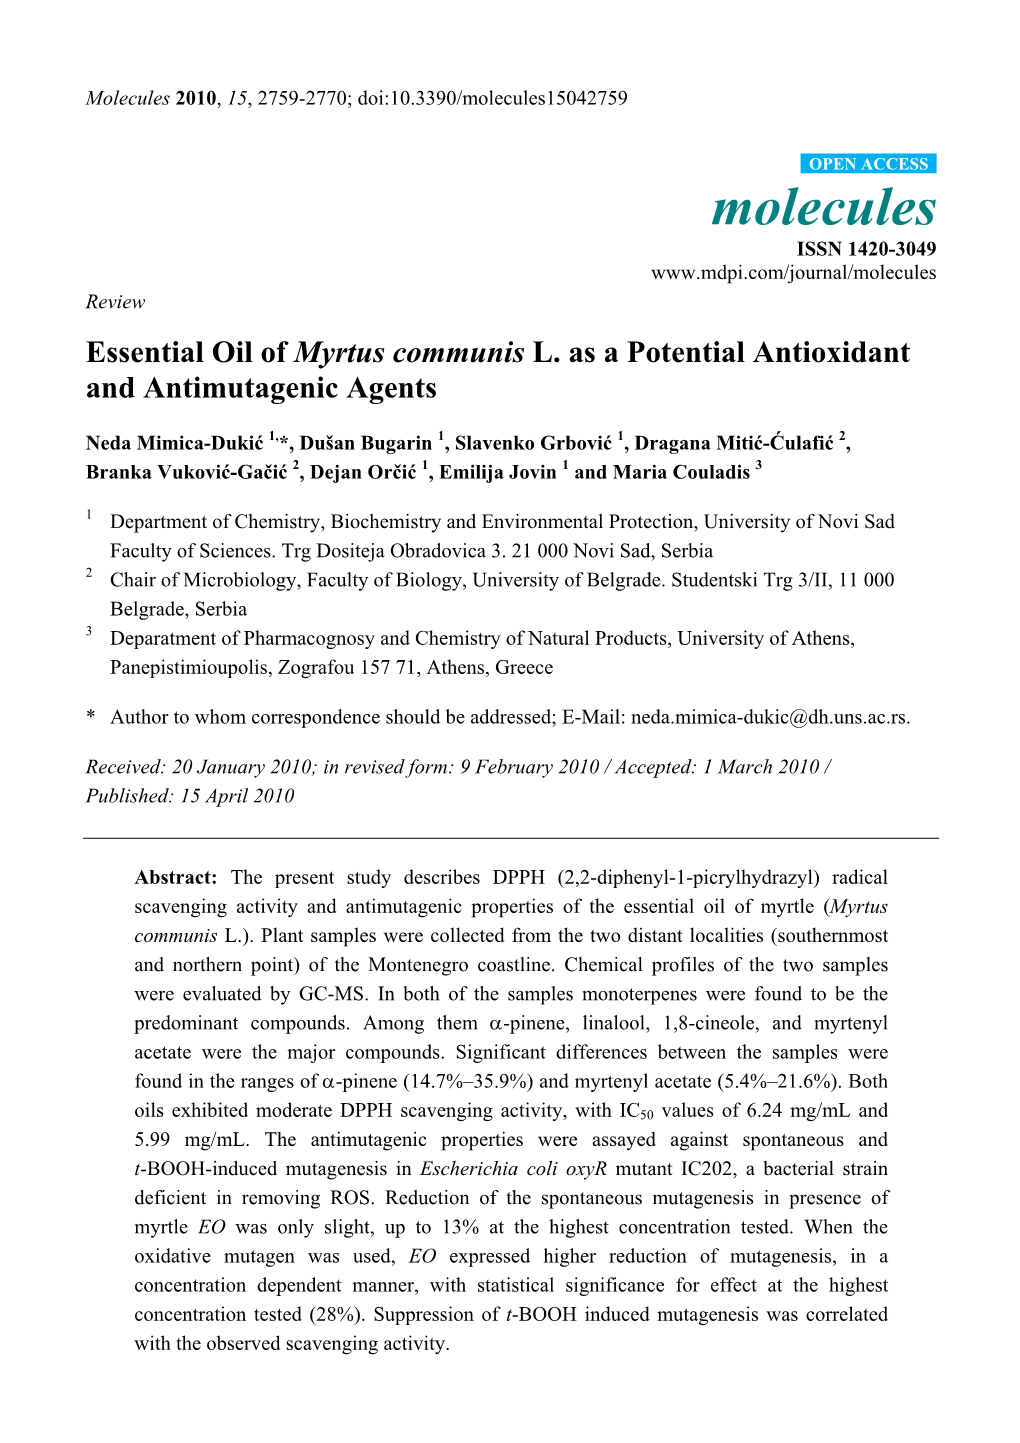 Essential Oil of Myrtus Communis L. As a Potential Antioxidant and Antimutagenic Agents